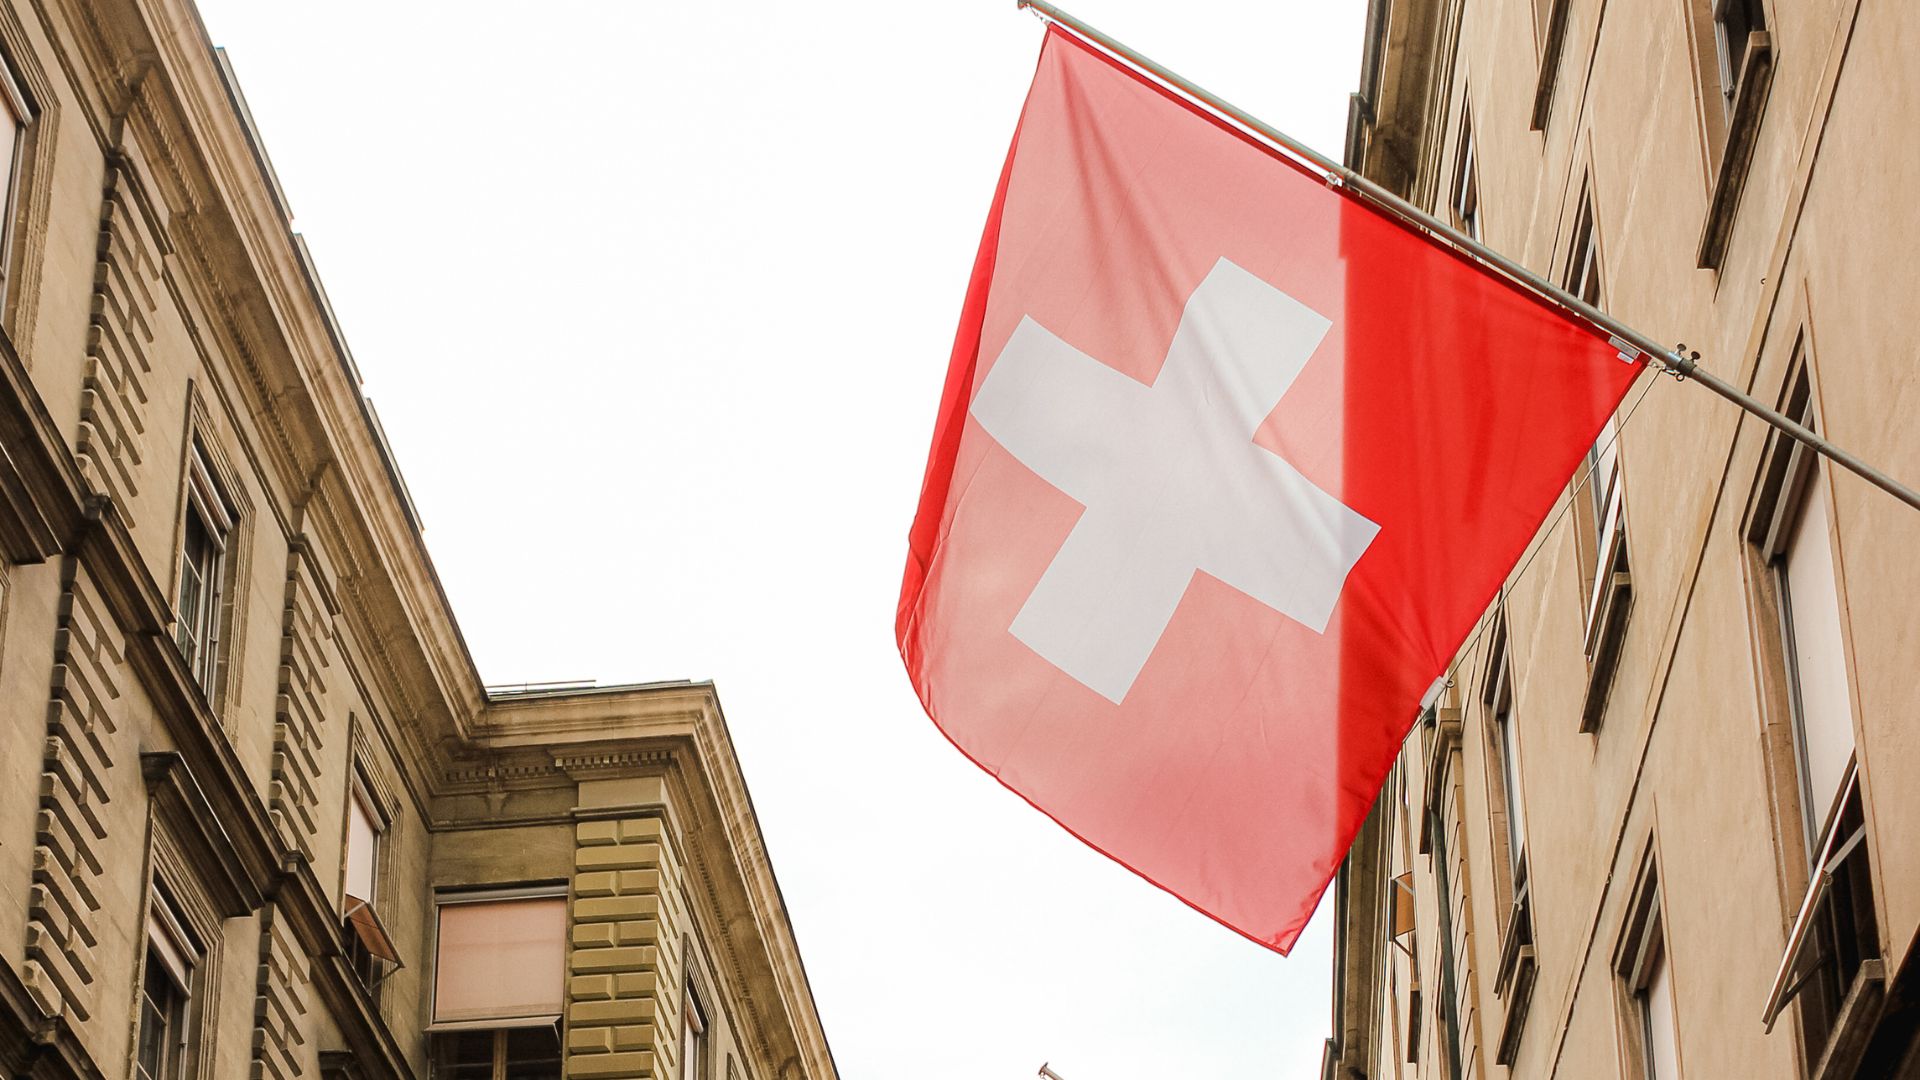 Swiss National Bank Endorses Credit Suisse Plan to Raise $4B from Investors